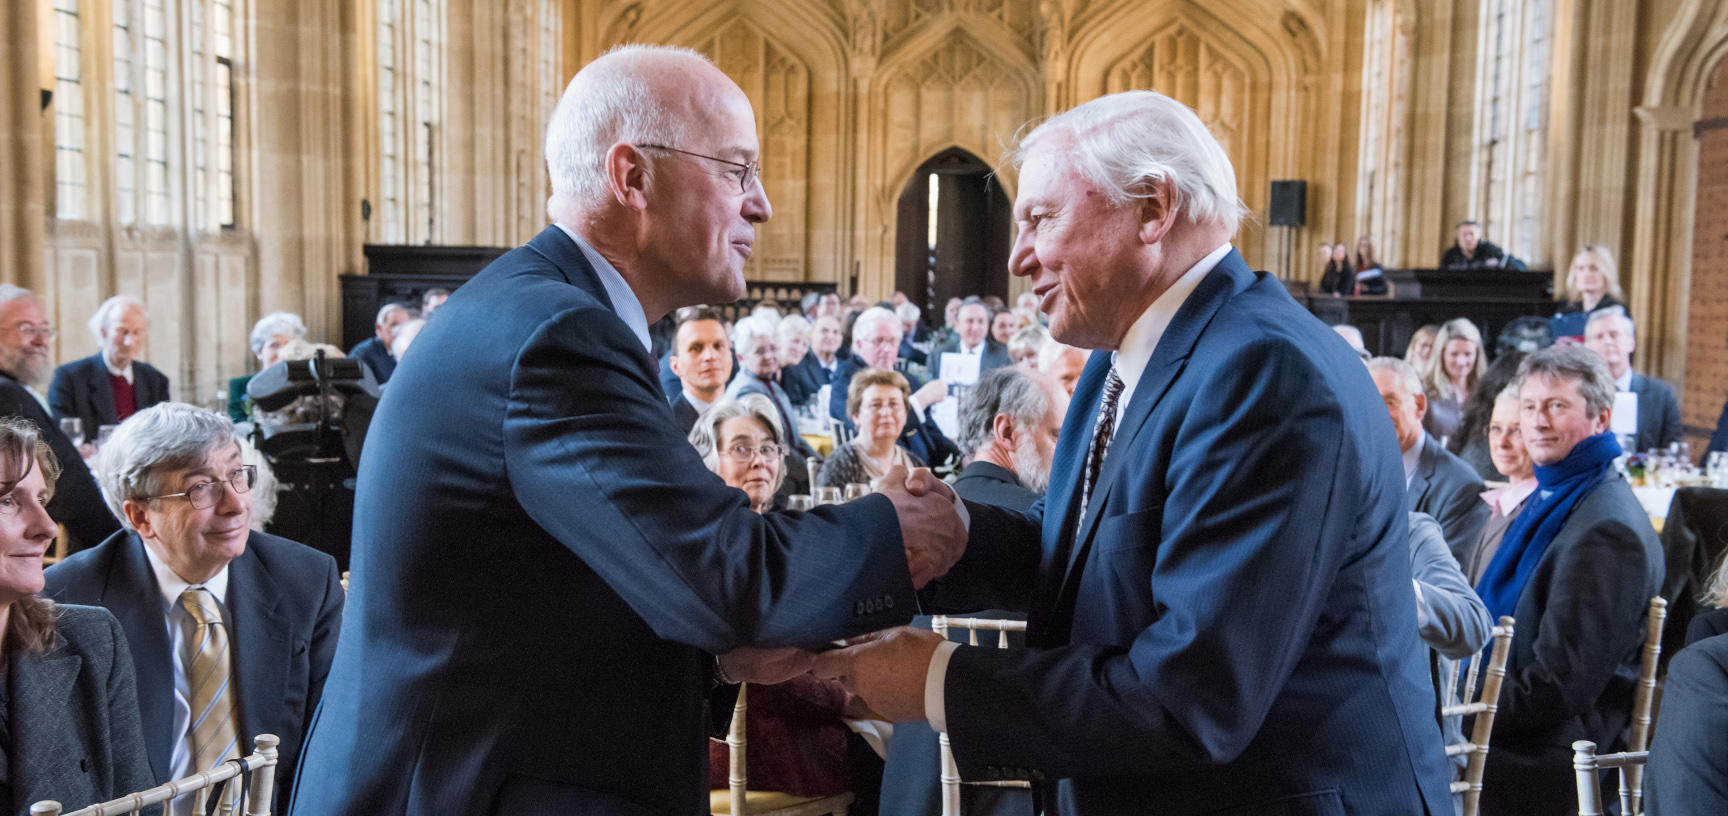 Sir David Attenborough receives the Bodley Medal in front of a crowd in the Divinity School